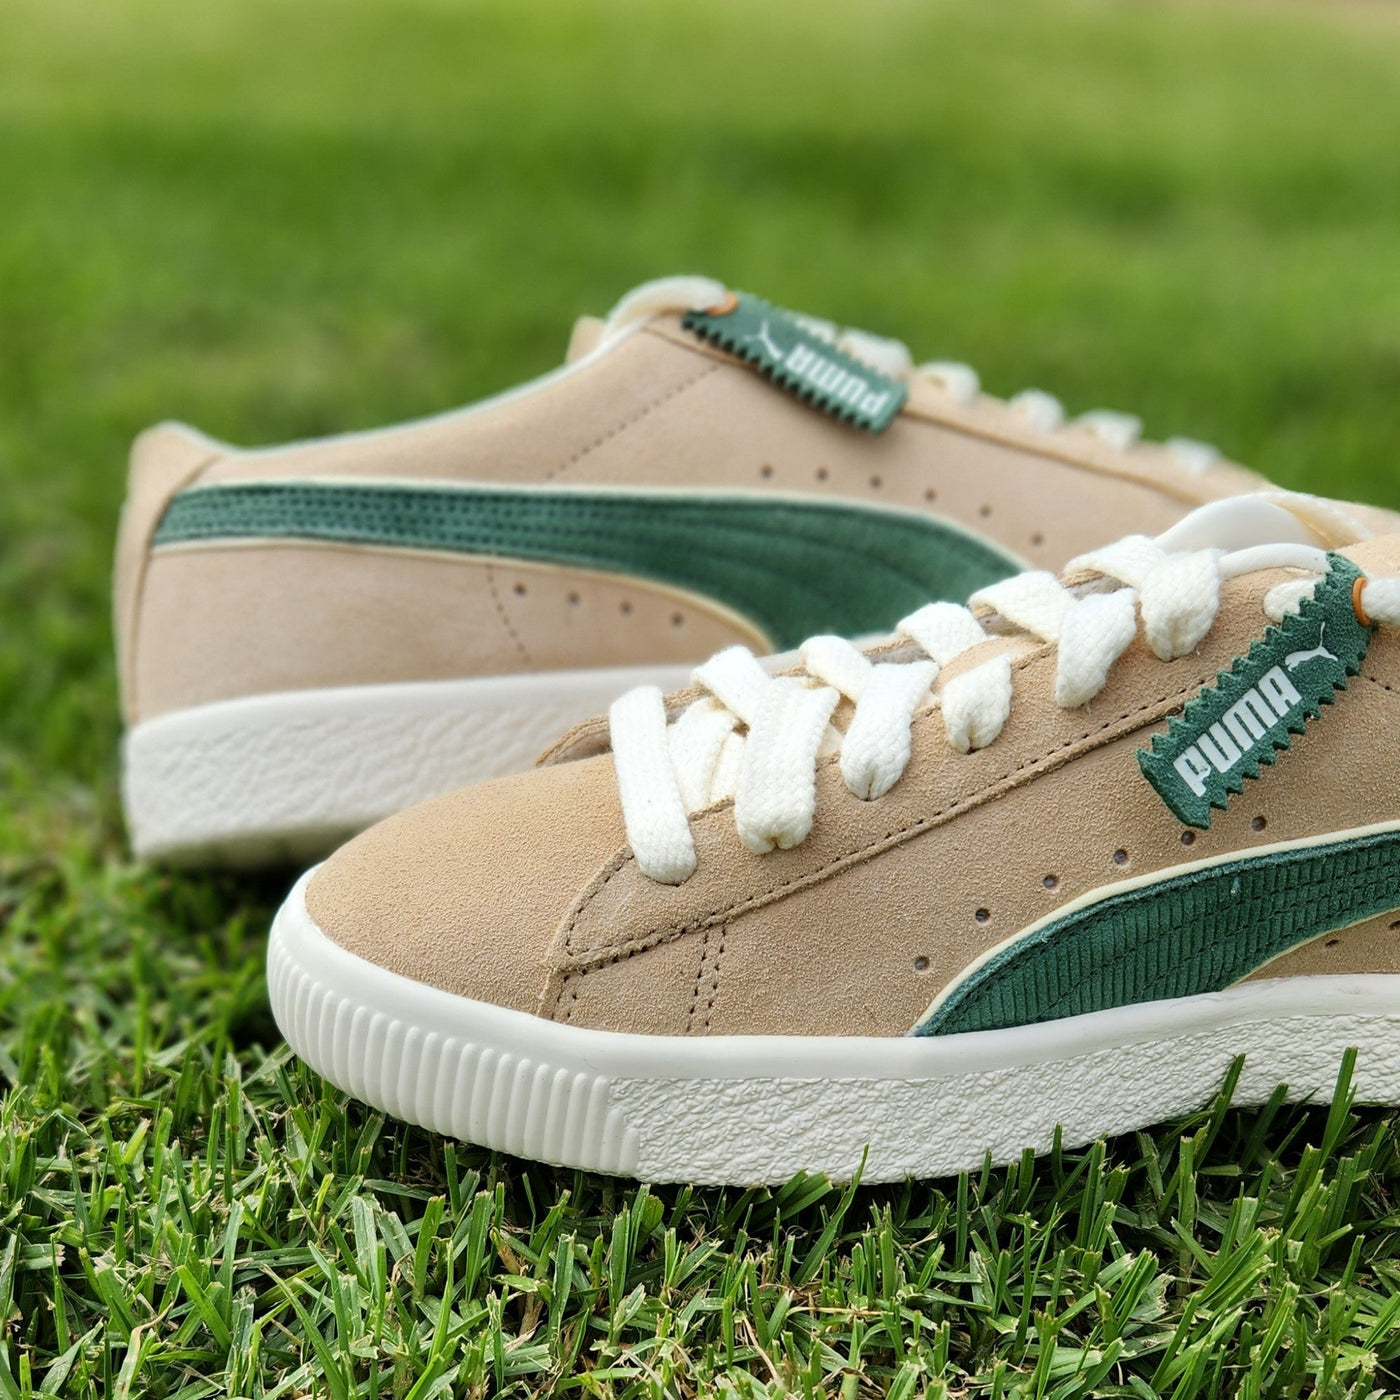 PUMA Players' Lounge collection is a love letter to vintage